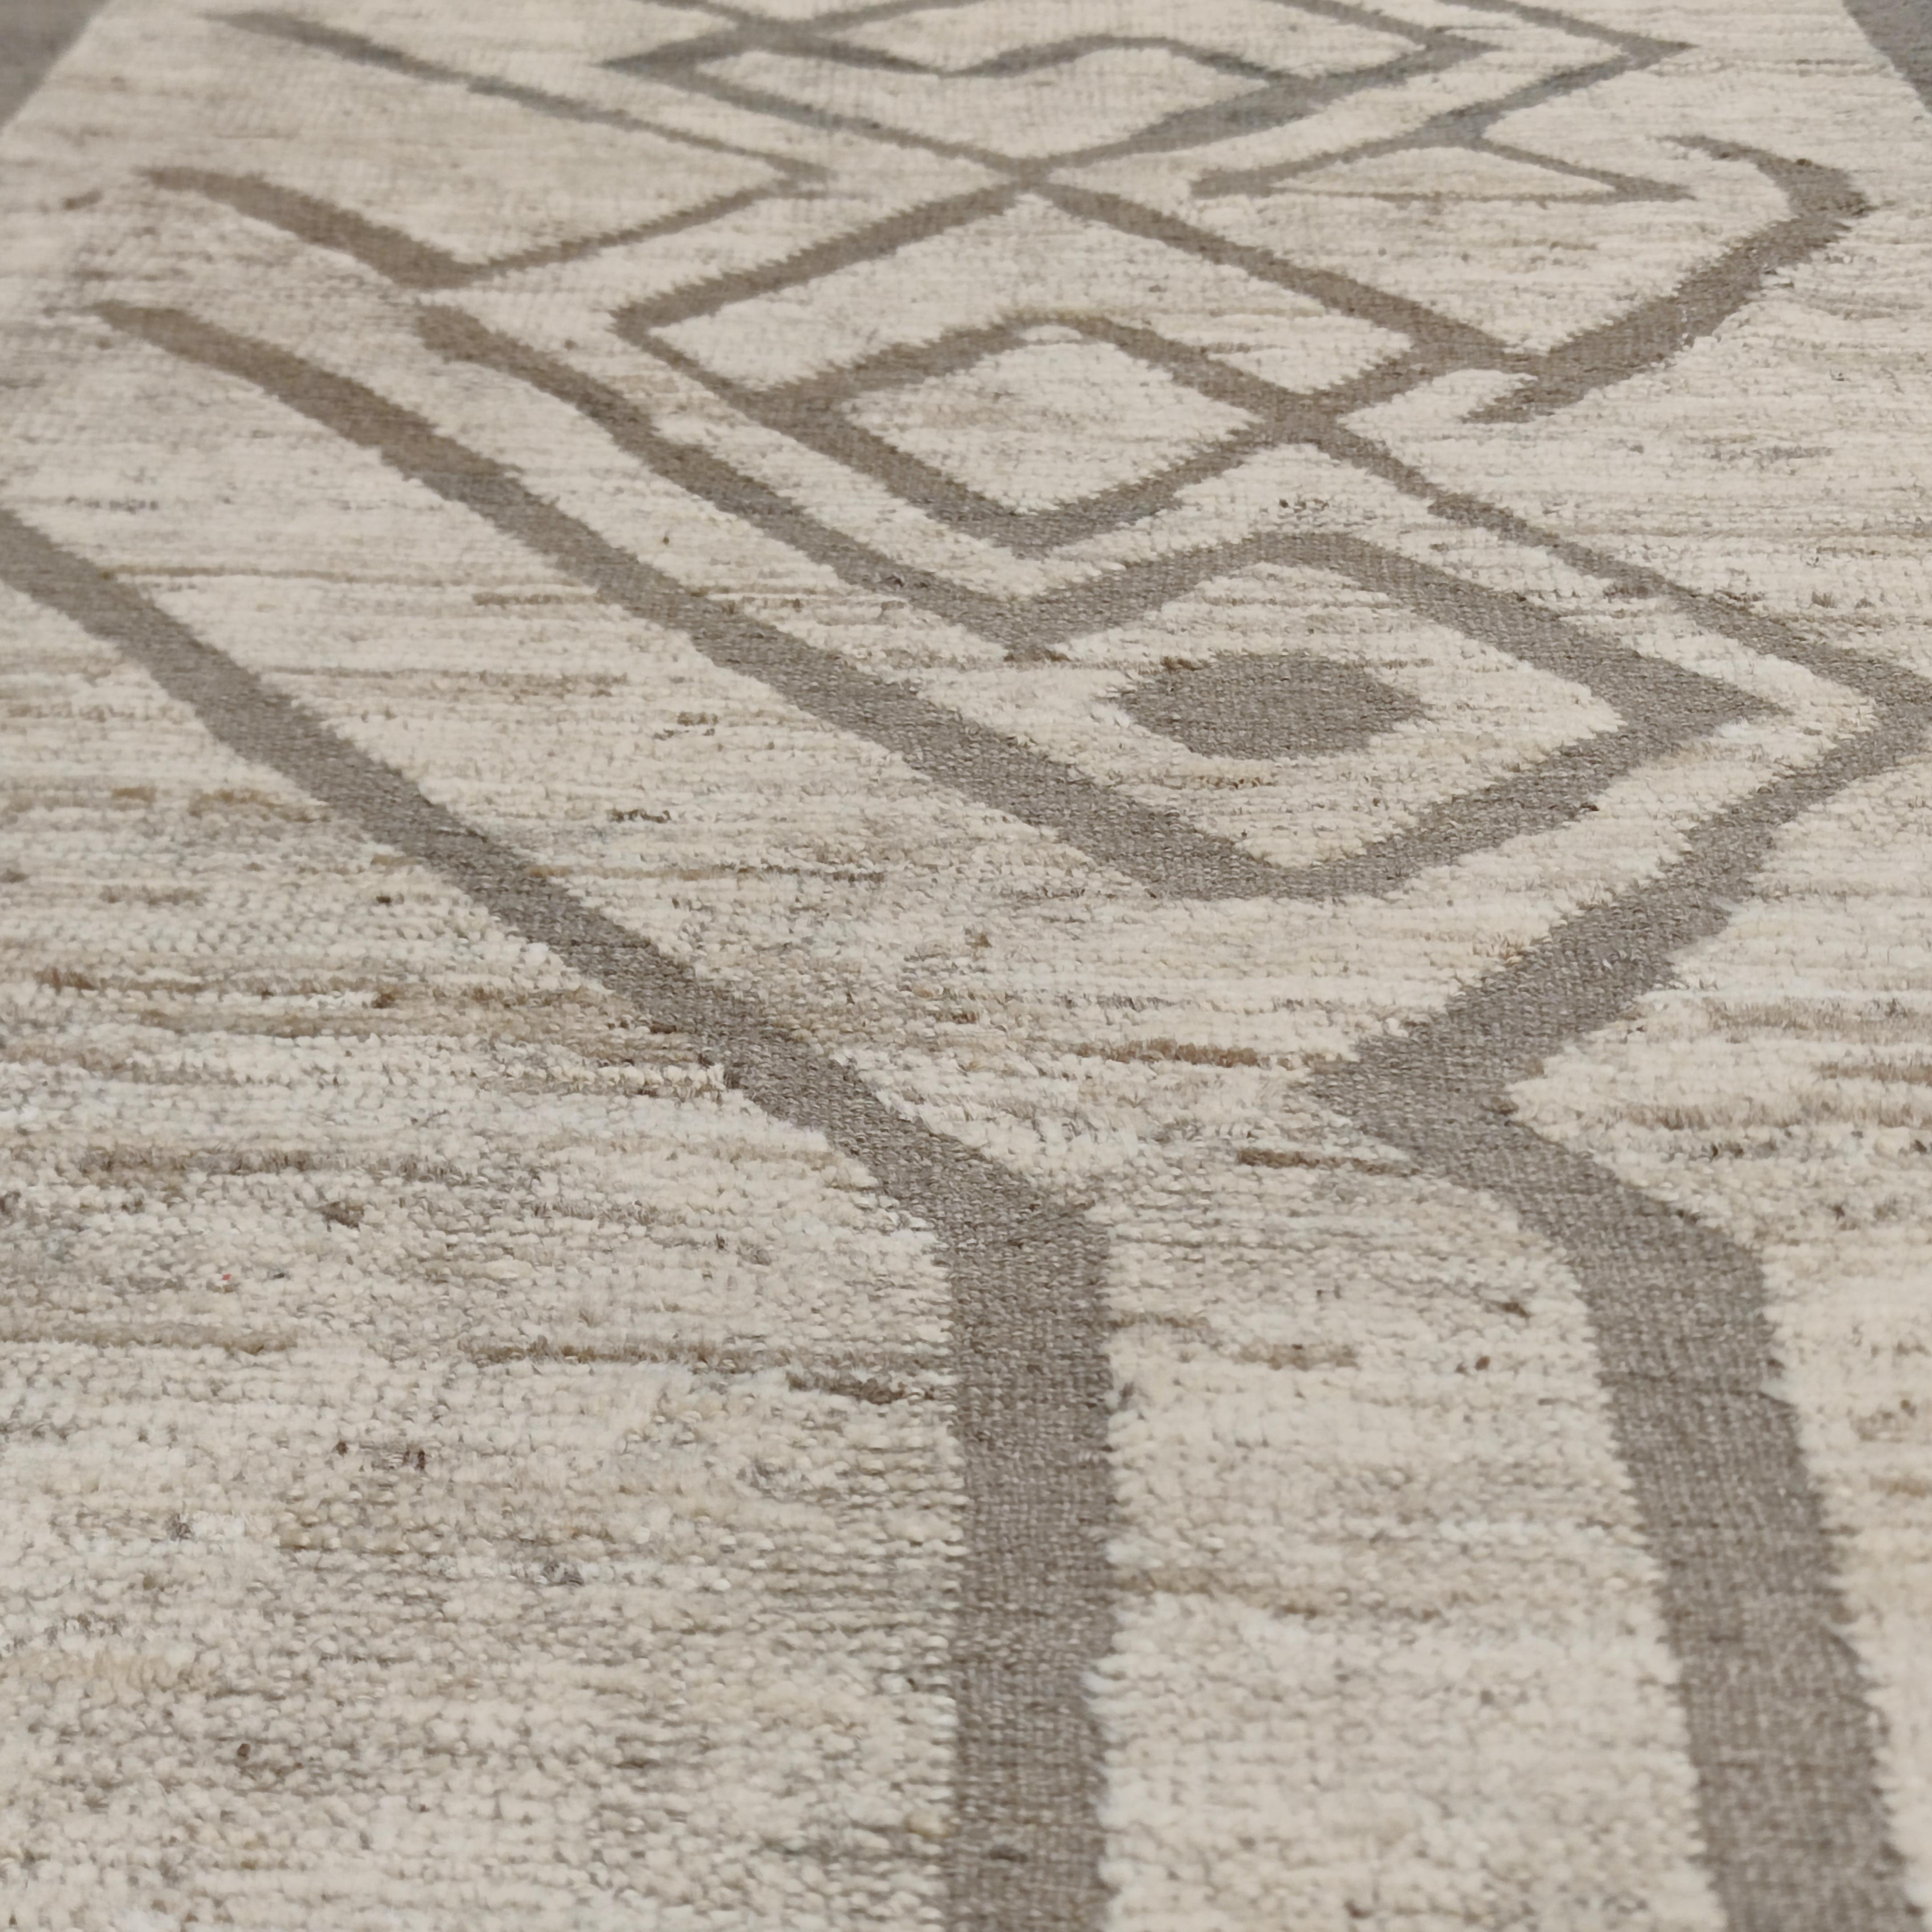 Hand-Knotted Modernist Textured Moroccan Style Kuba Runner Rug by Alberto Levi Gallery For Sale